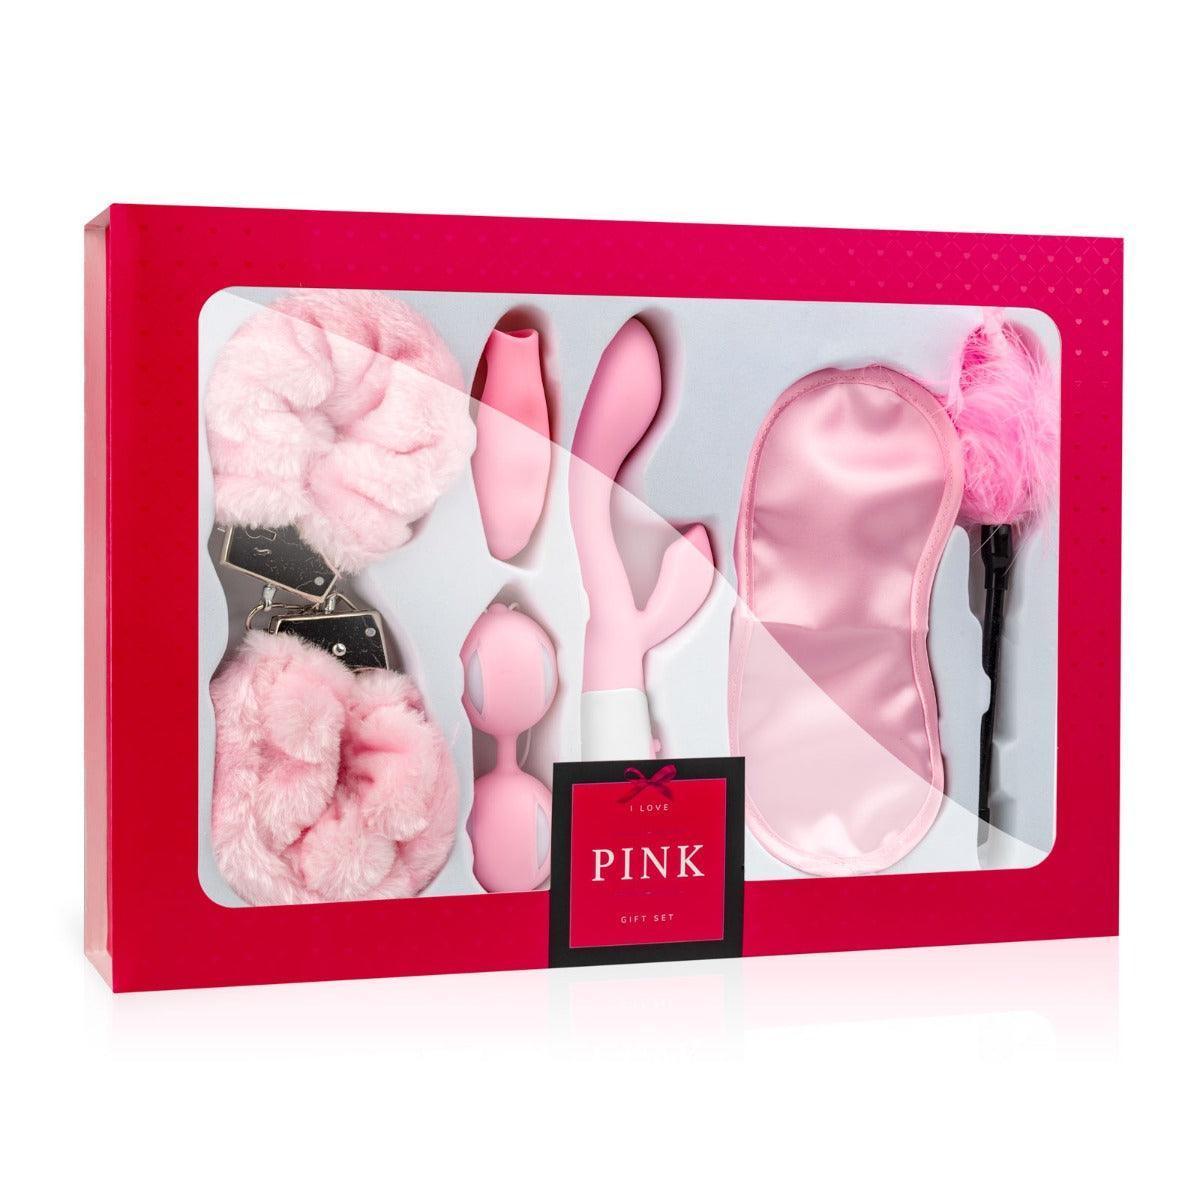 Loveboxxx - I Love Pink Couples Sex Toy Gift Box